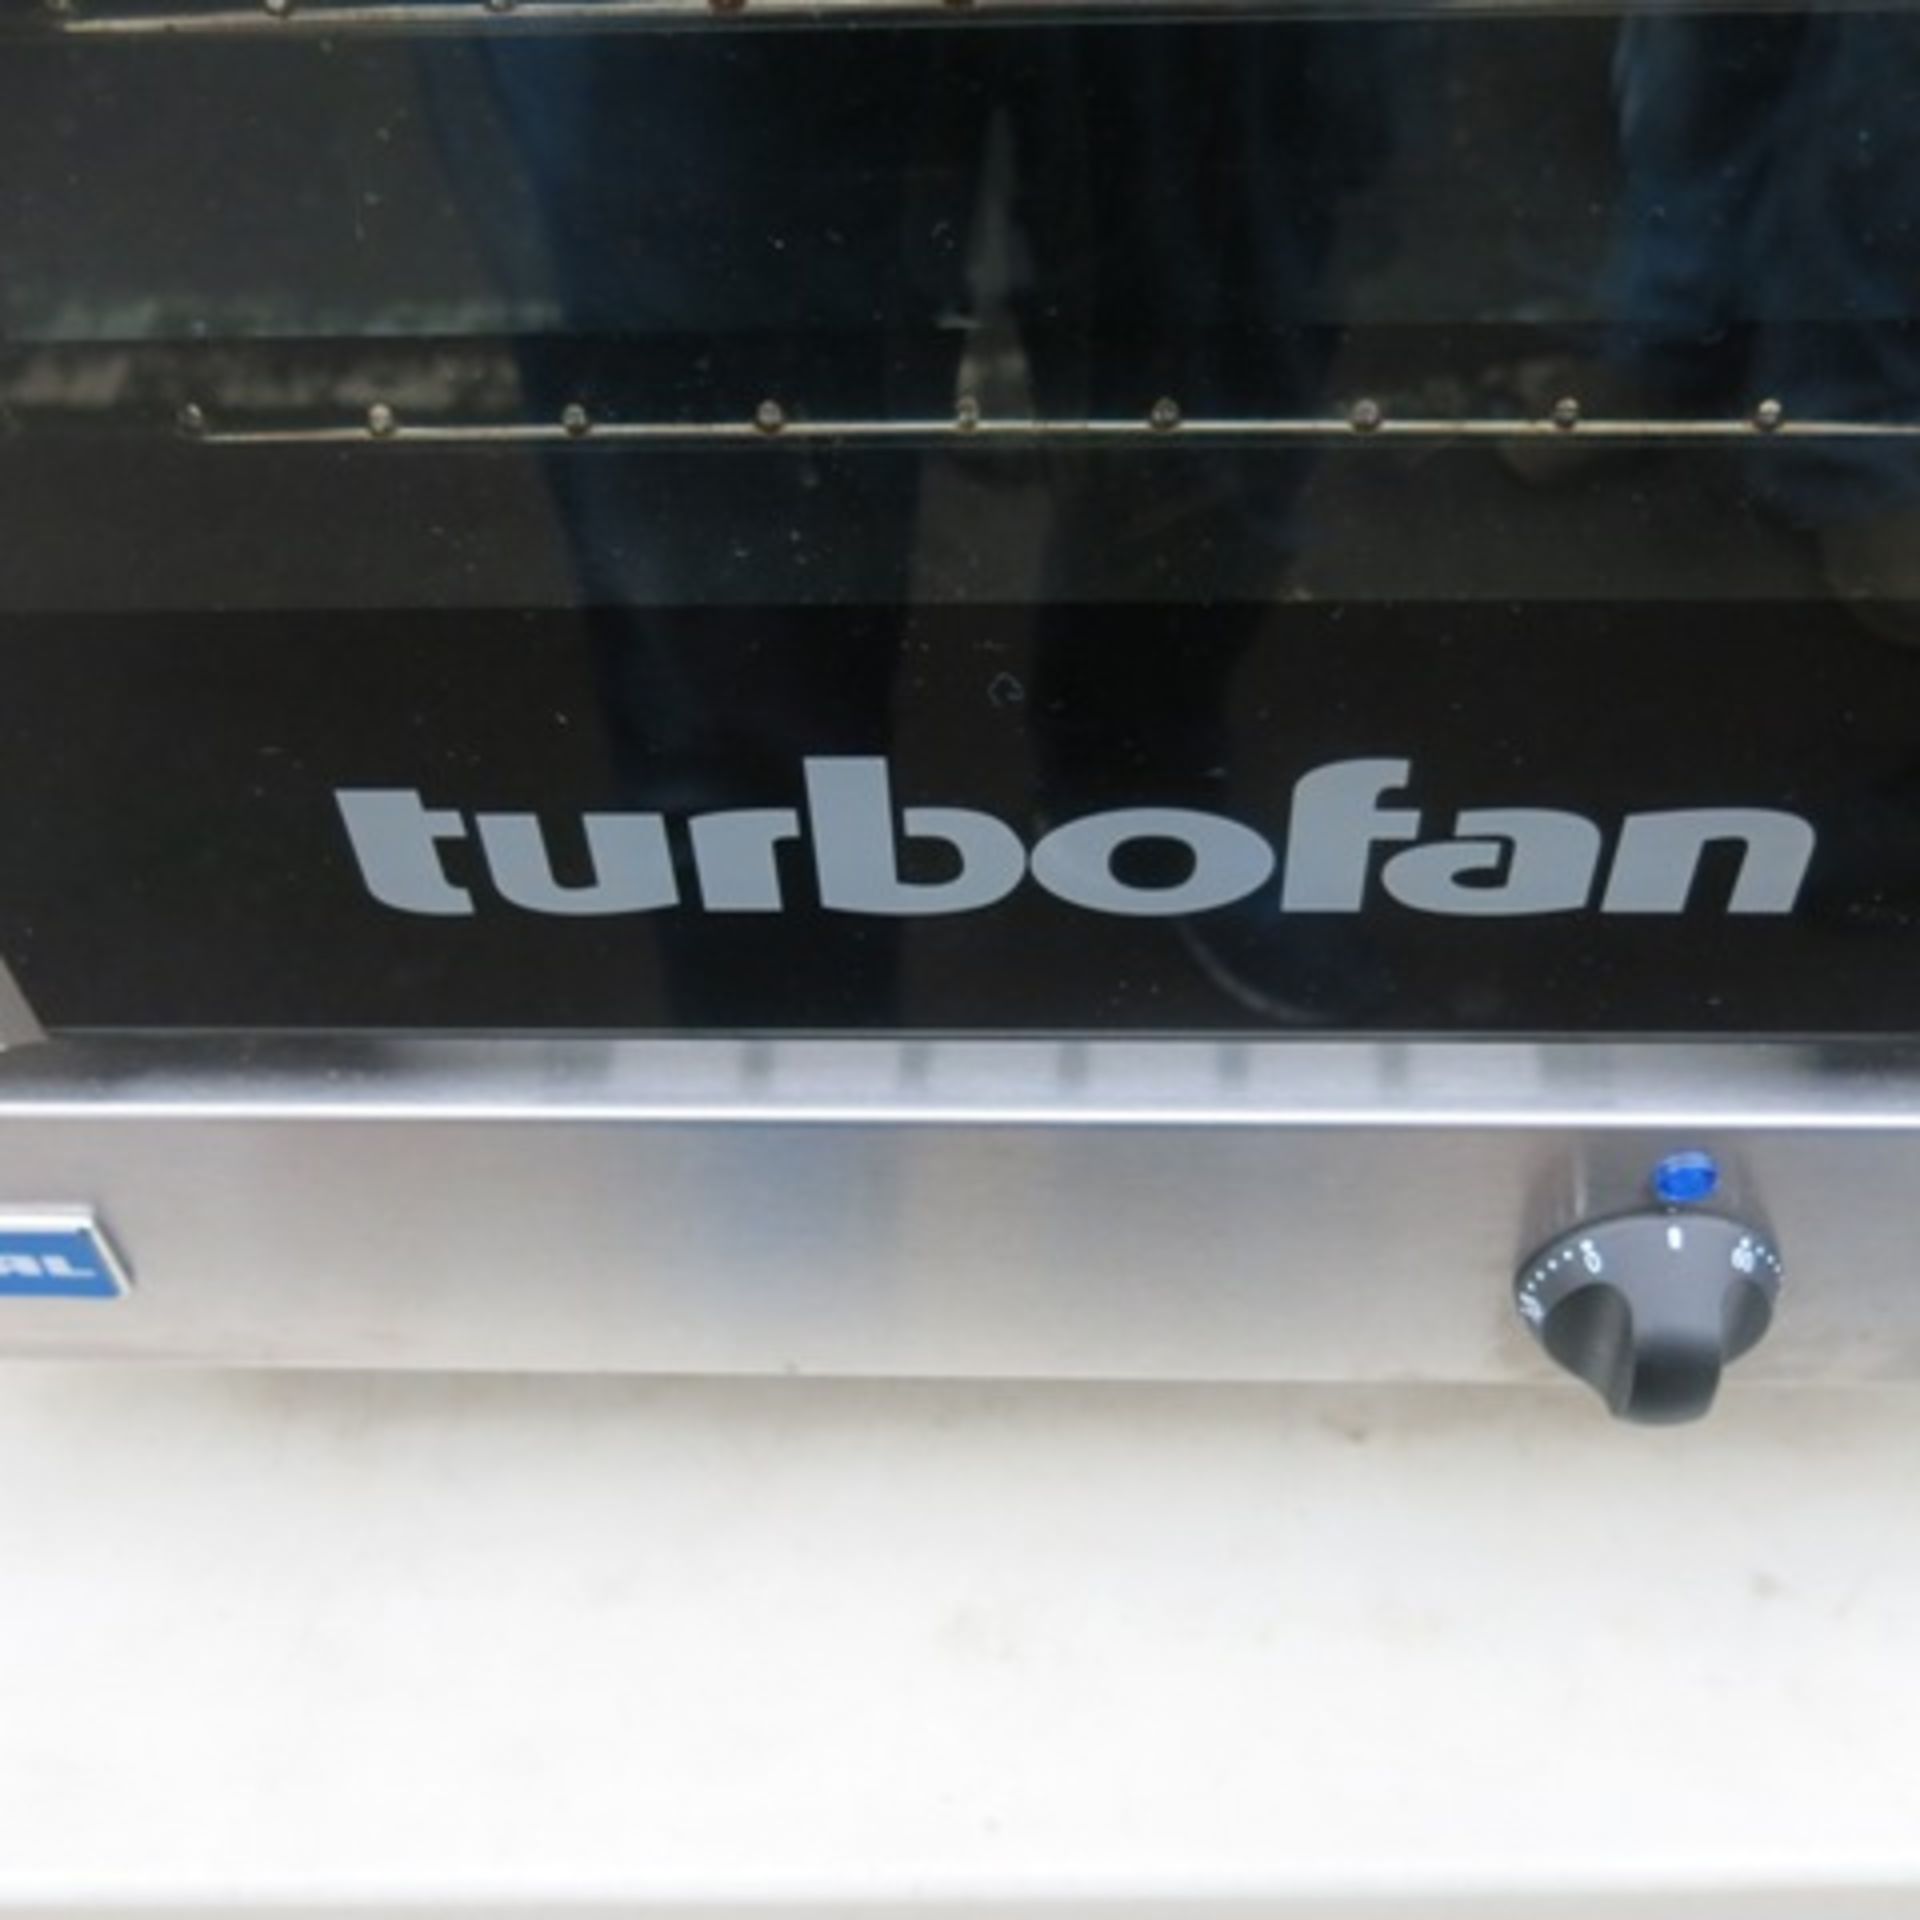 Blue Seal Counter Top Turbo Fan Convection Oven, Model E22M3. Comes with 3 Trays - Image 3 of 9